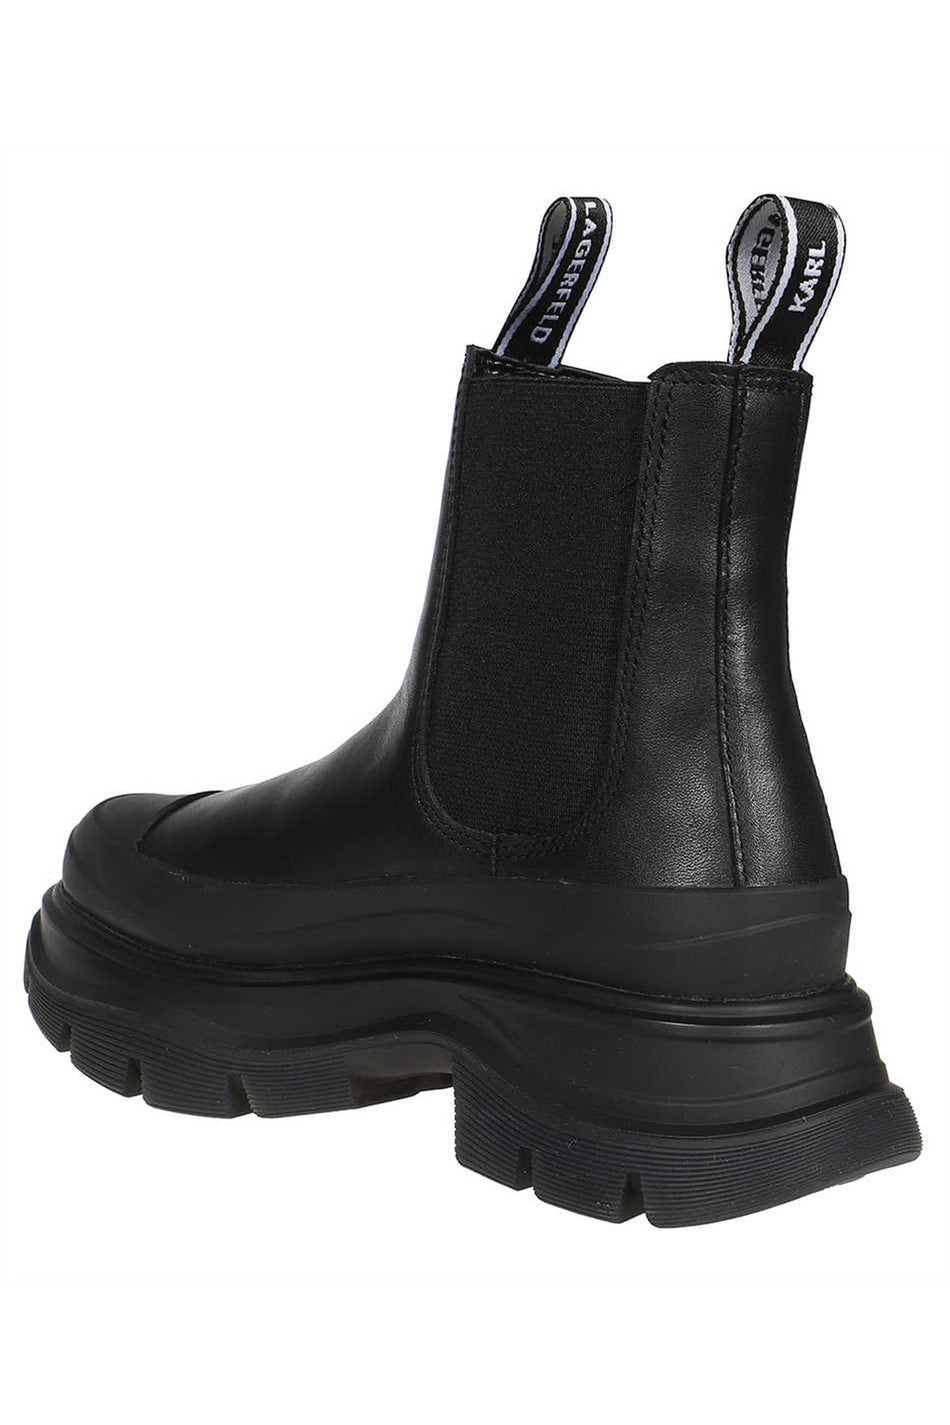 Leather ankle boots-Karl Lagerfeld-OUTLET-SALE-ARCHIVIST